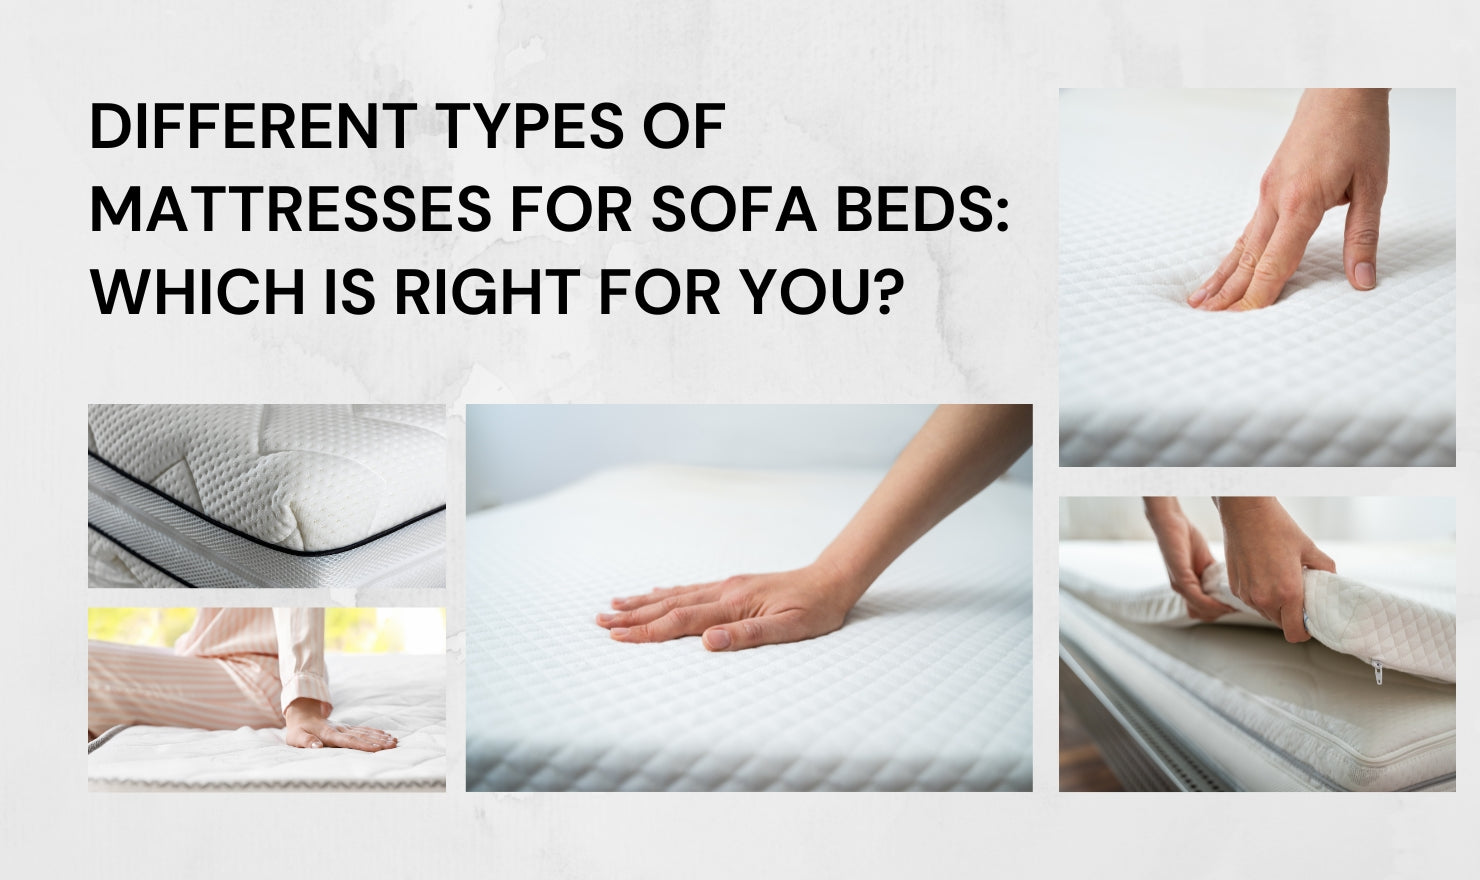 Different Types of Mattresses for Sofa Beds: Which Is Right for You?